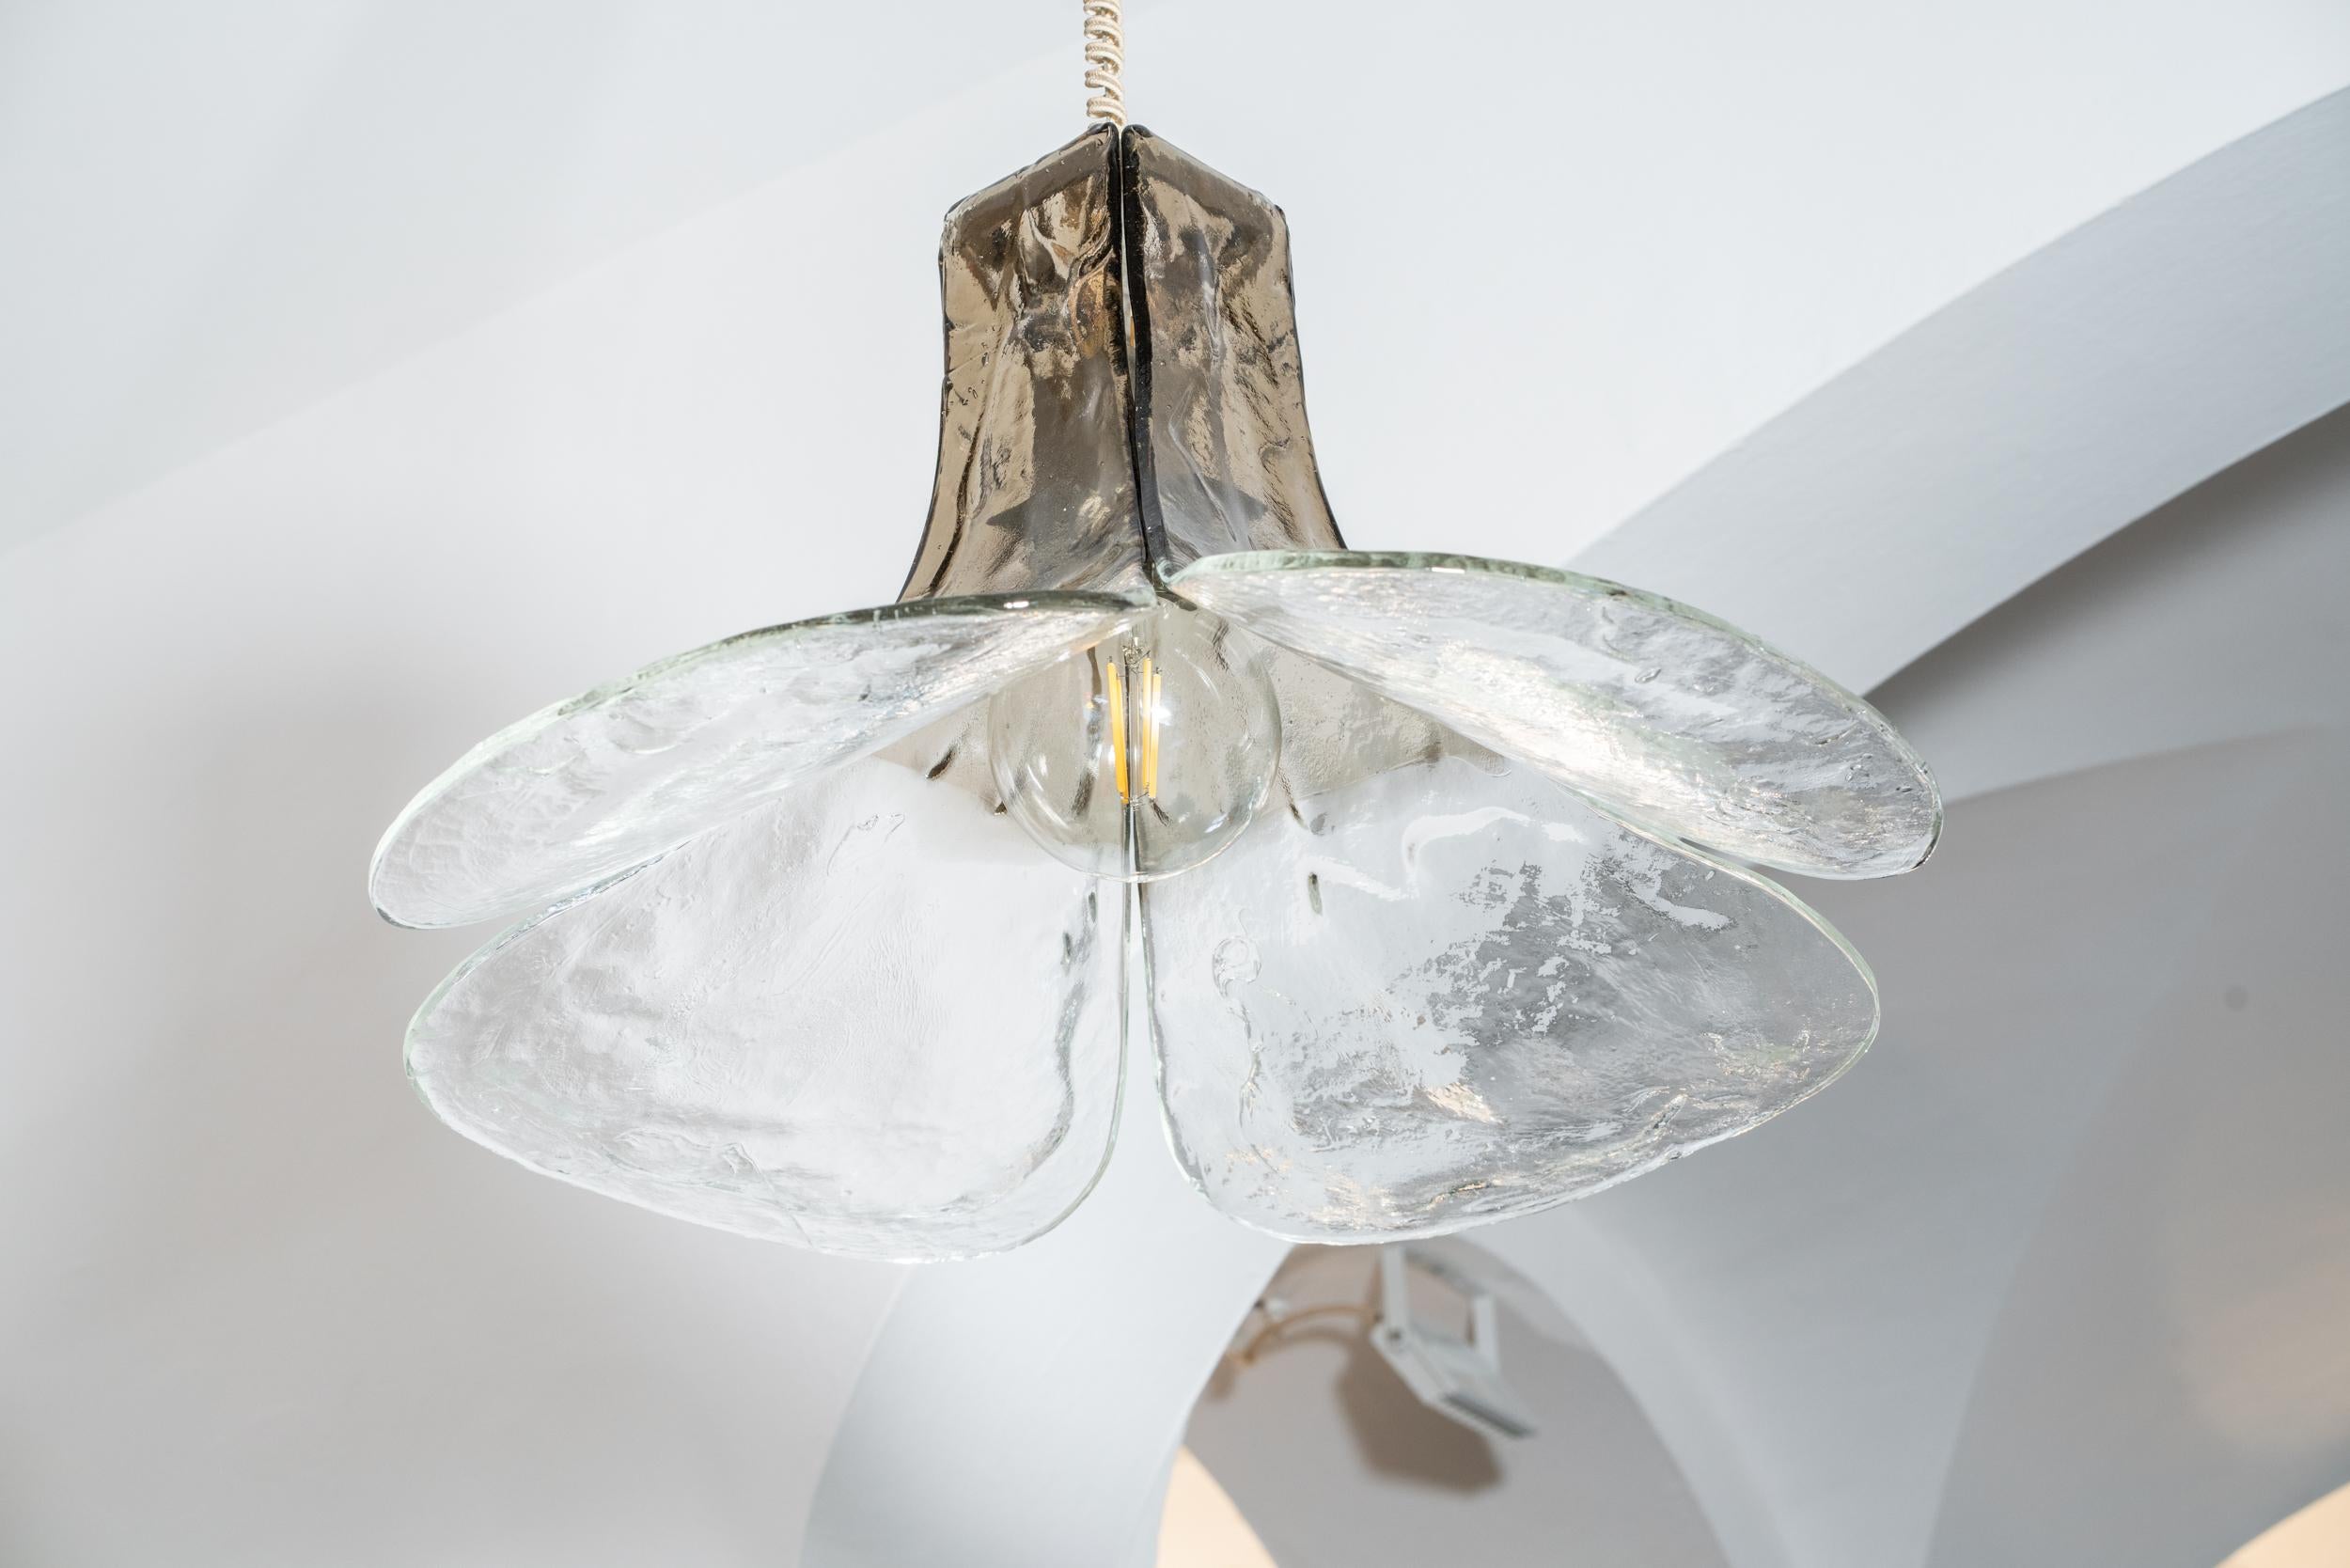 Large Murano glass pendant lamp
Designed by Carlo Nason and manufactured by Mazzega, model LS185
The lamp consists of four worked glass petals, with shades from transparent to green/grey, attached to a metal frame 
